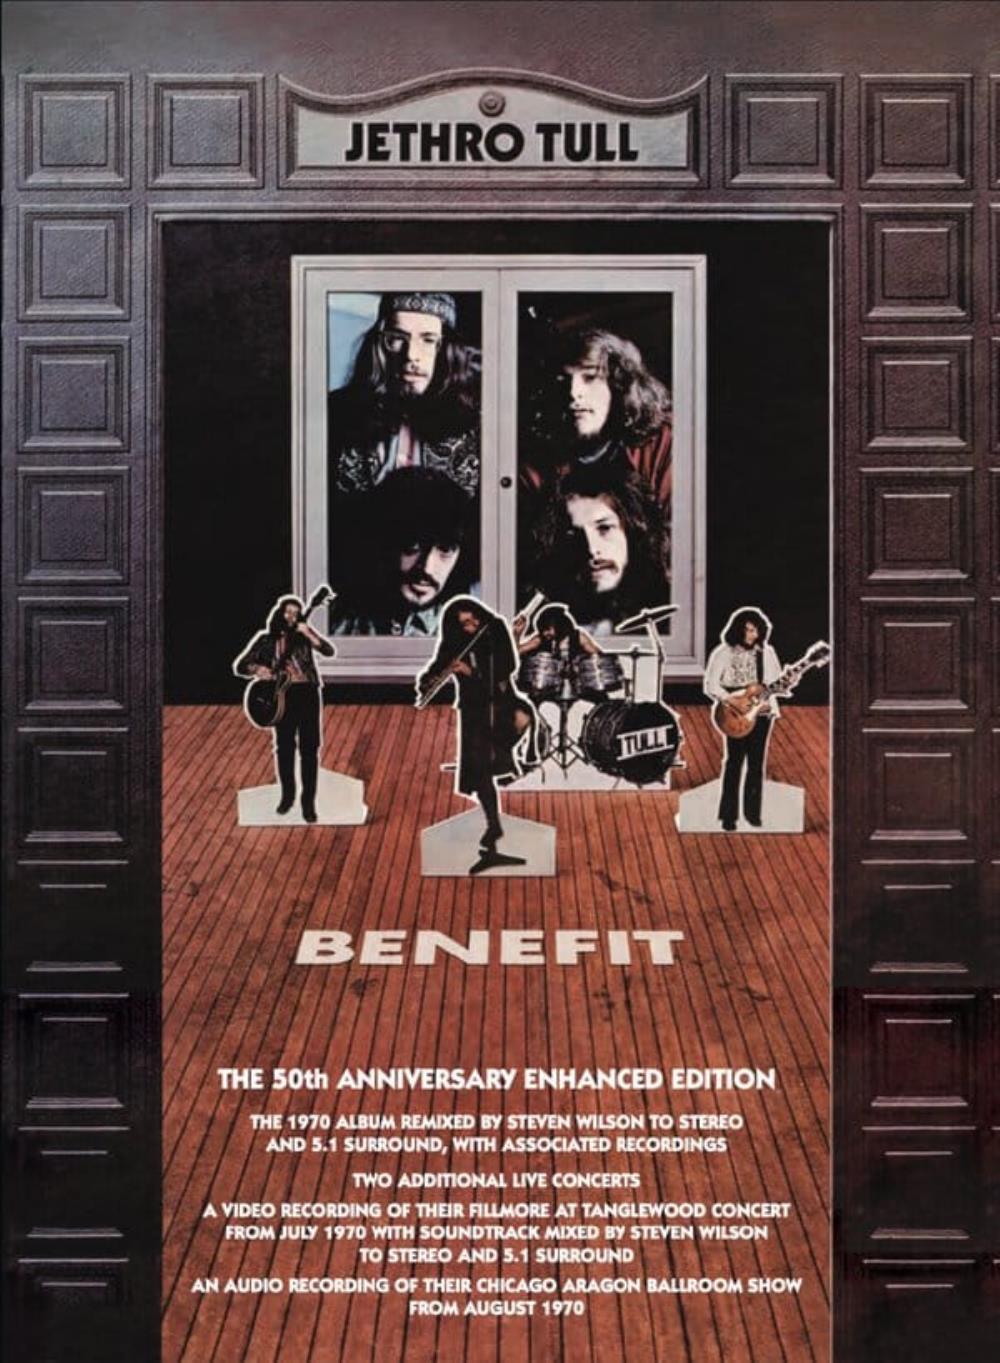  Benefit - 50th Anniversary Enhanced Edition by JETHRO TULL album cover